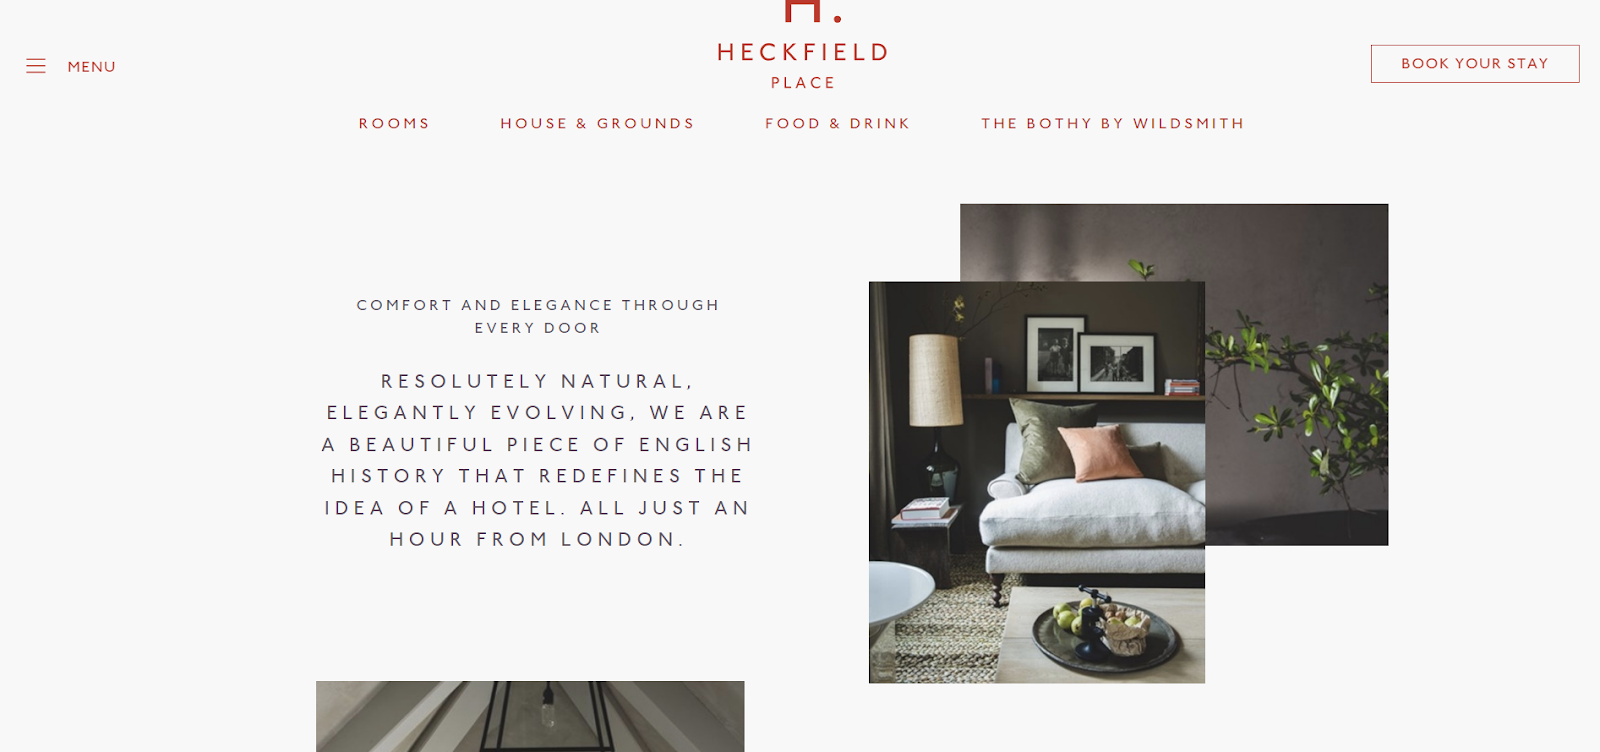 Heckfield Place: